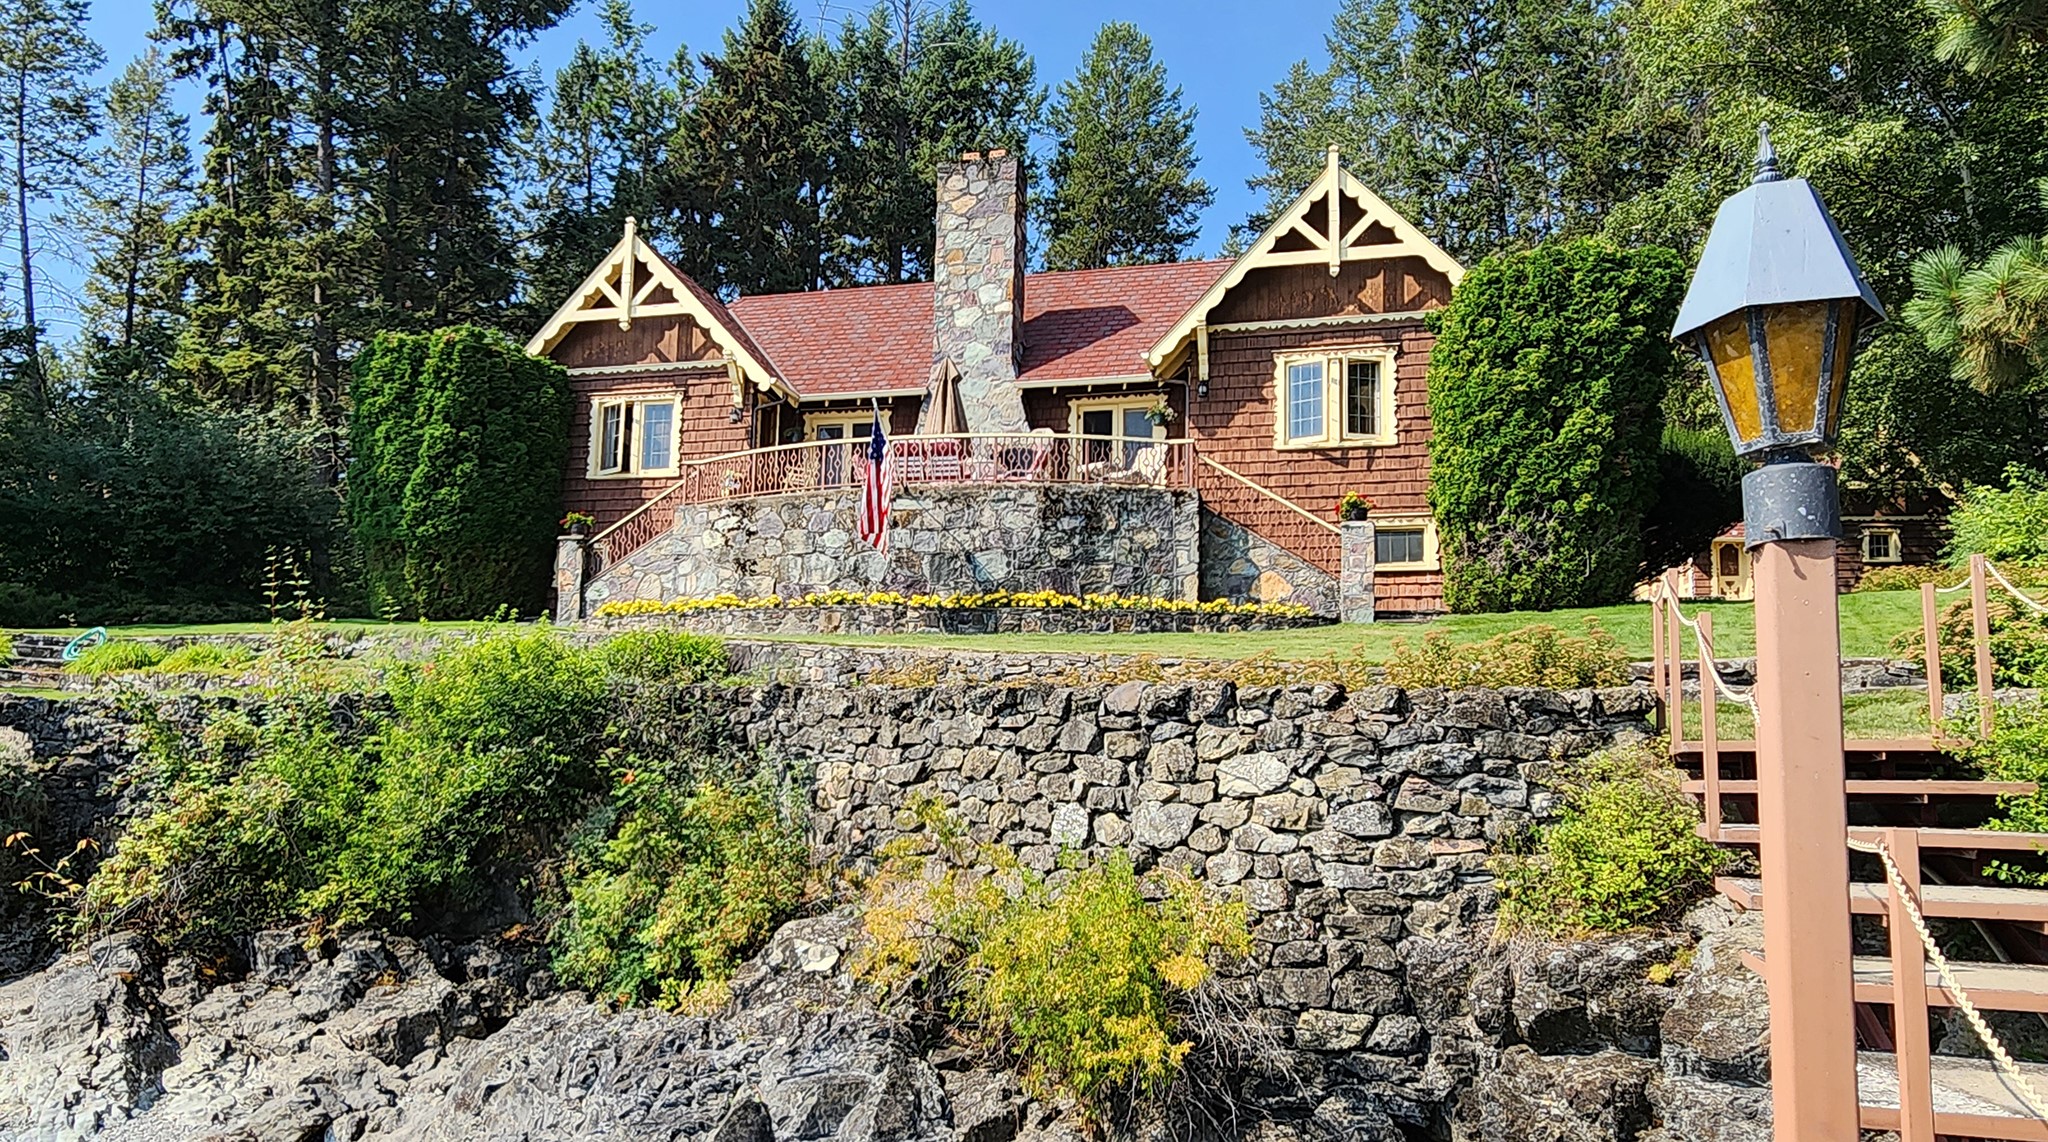 Since the 1940s, passing boaters have enjoyed this picturesque "Gingerbread" house along the westshore of Flathead Lake. This historic home sits on 3.7 forested acres with378 feet of frontage spread over multiple lots (see survey) on the tip of Caroline Point. The circular driveway is bordered by long standing rockwork , landscaped flower beds and lawns wrapping around the home down to the lake. Enter into a large Living Room with rock fireplace. As you discover the home, you'll notice all the carved woodwork detailing, wood floors, and historic lighting & textiles. The south wing has 2 Bedrooms and full Bath. The north wing has the Kitchen and Dining Room, third Bedroom with attached 3/4 Bath. Downstairs is a bedroom, storage and utility room. Mornings on the stone patio you will enjoy the eastern panorama of the Swan Mountains,Glacier Park and the sound Flathead Lake's clear water splaching on the rocks.Walk down the stone path to the the concrete dock with  covered boat slip for re- laxing in the sun, a swim or hop on your boat for a scenic cruise, fishing or watersports. Other buildings include the original double garage with work room and a laundry cabin. To the west of the home is the forested interior knoll of Caroline Point for a guest house or even a new main home leaving the lakefront home for guests or day use.   Call Scott Hollinger at 406-253-7268 or your real estate professional.